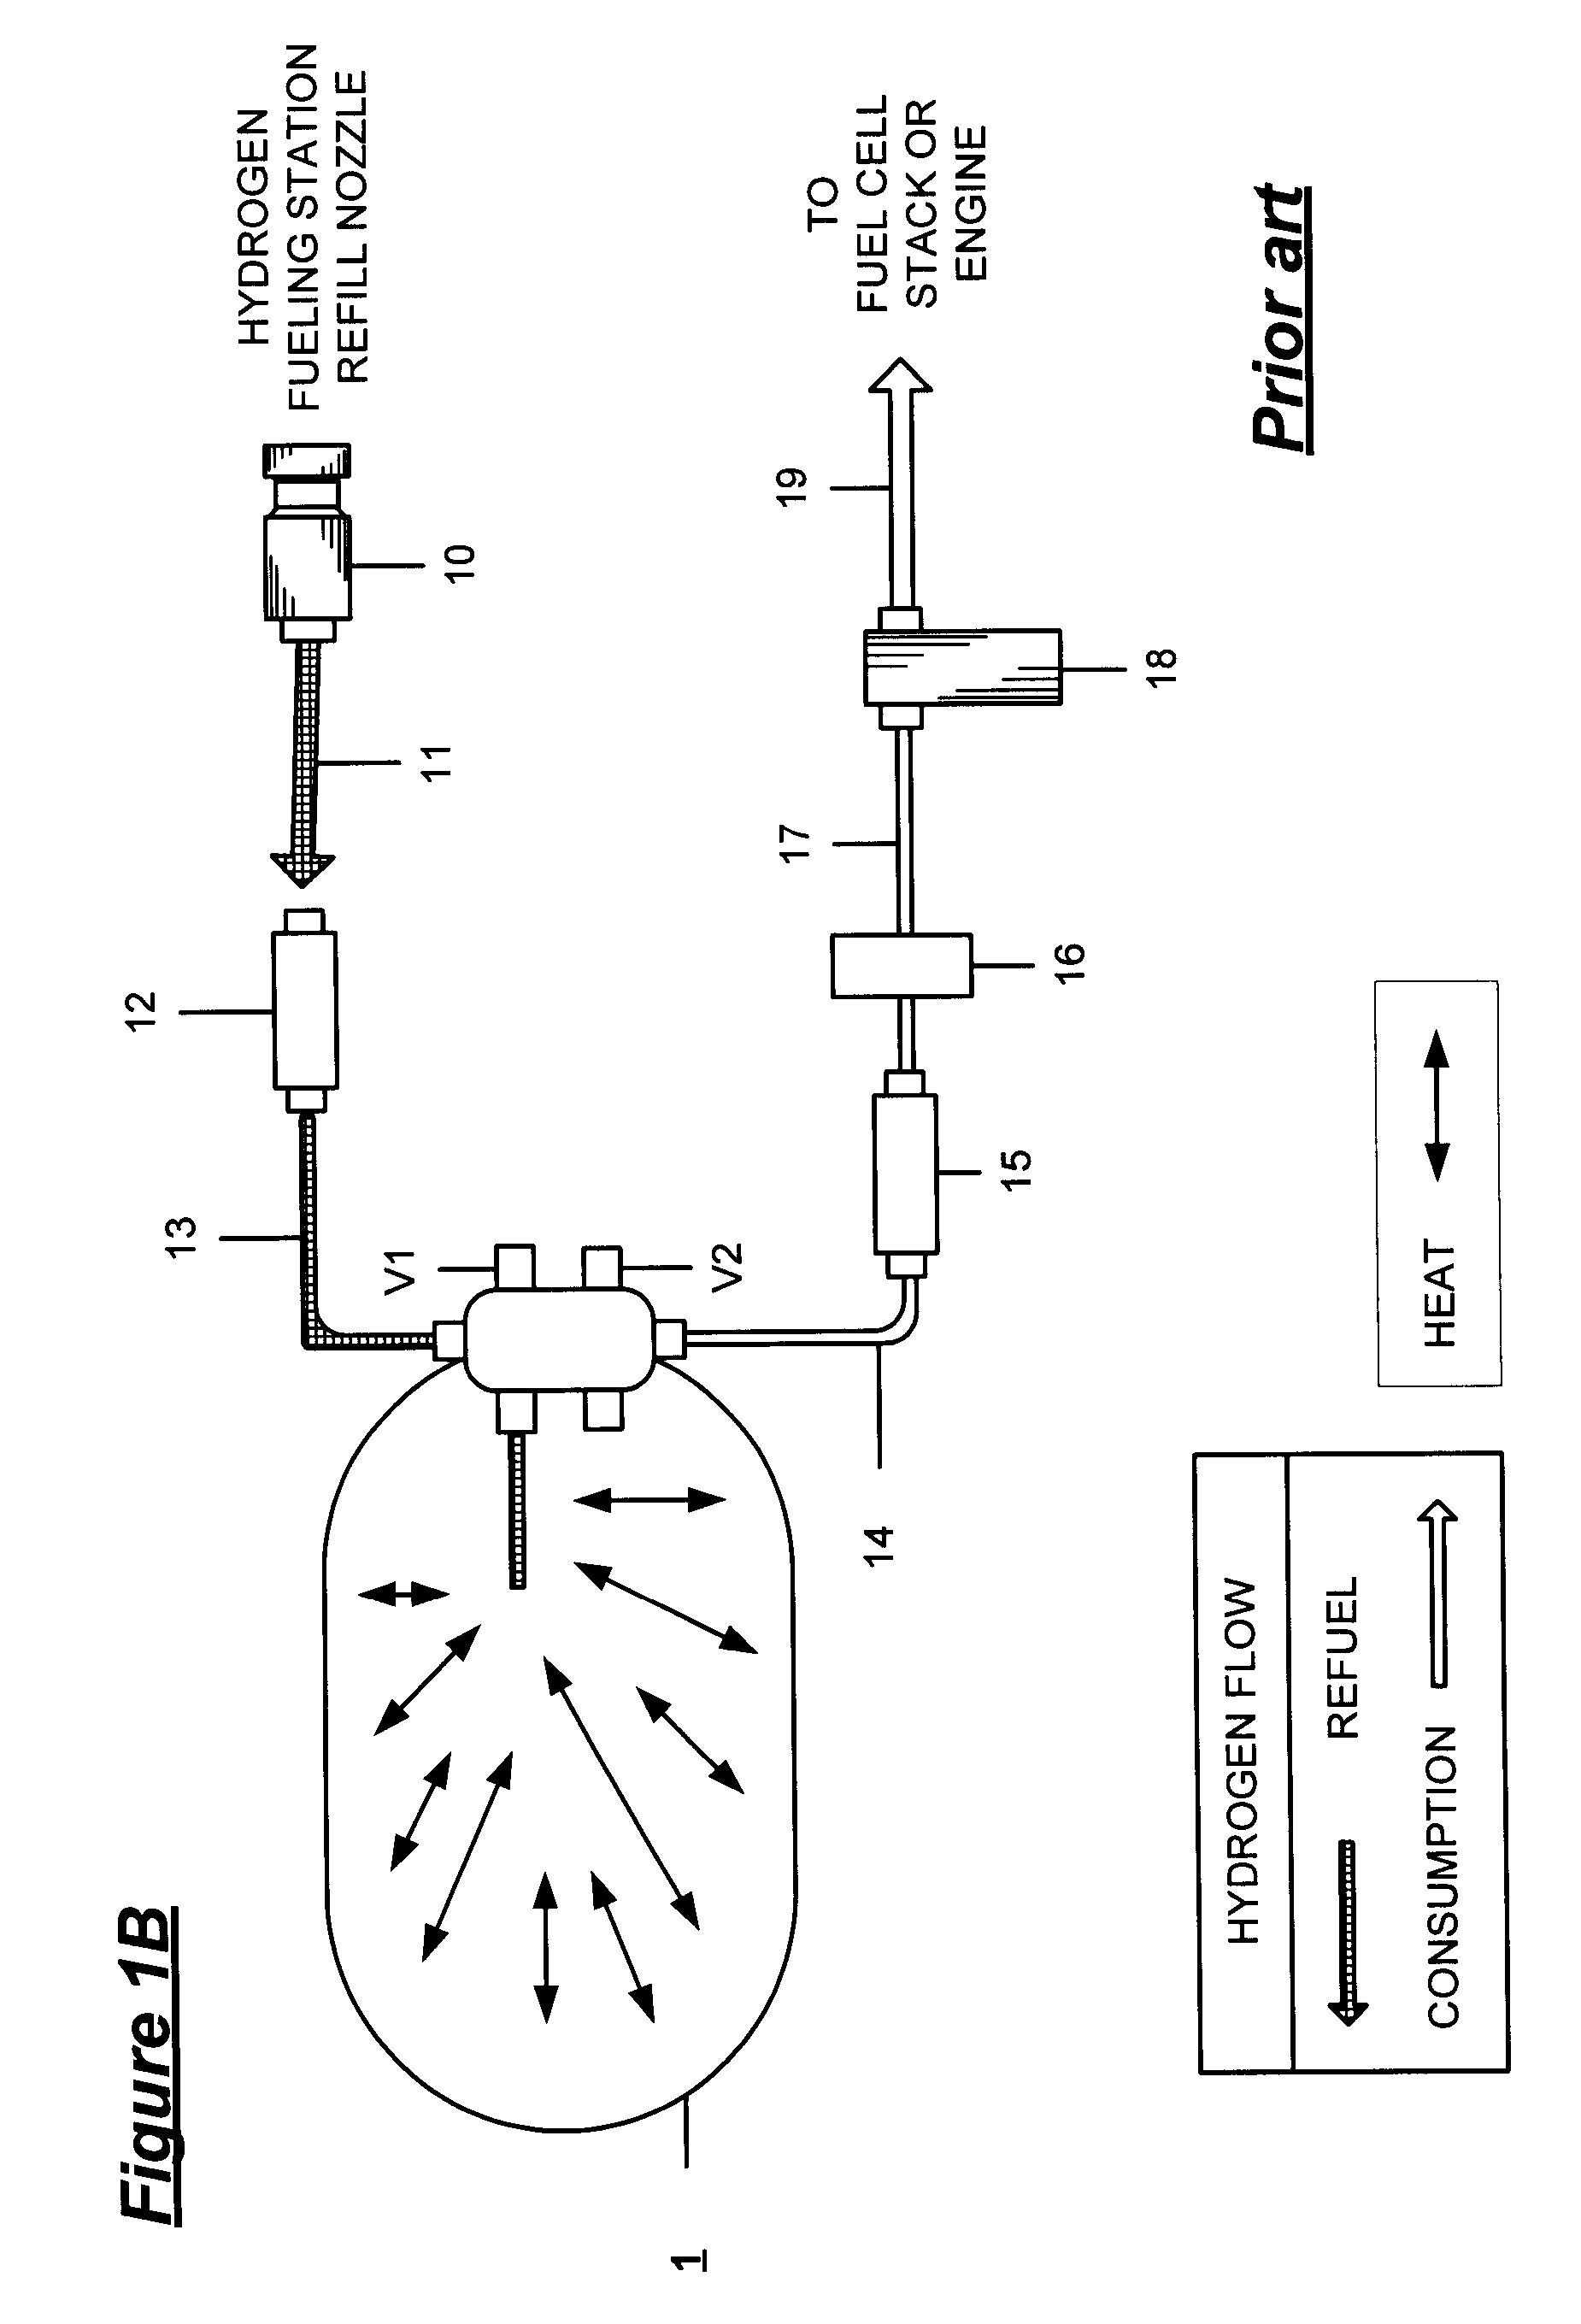 Pressure Powered Cooling System for Enhancing the Refill Speed and Capacity of On Board High Pressure Vehicle Gas Storage Tanks